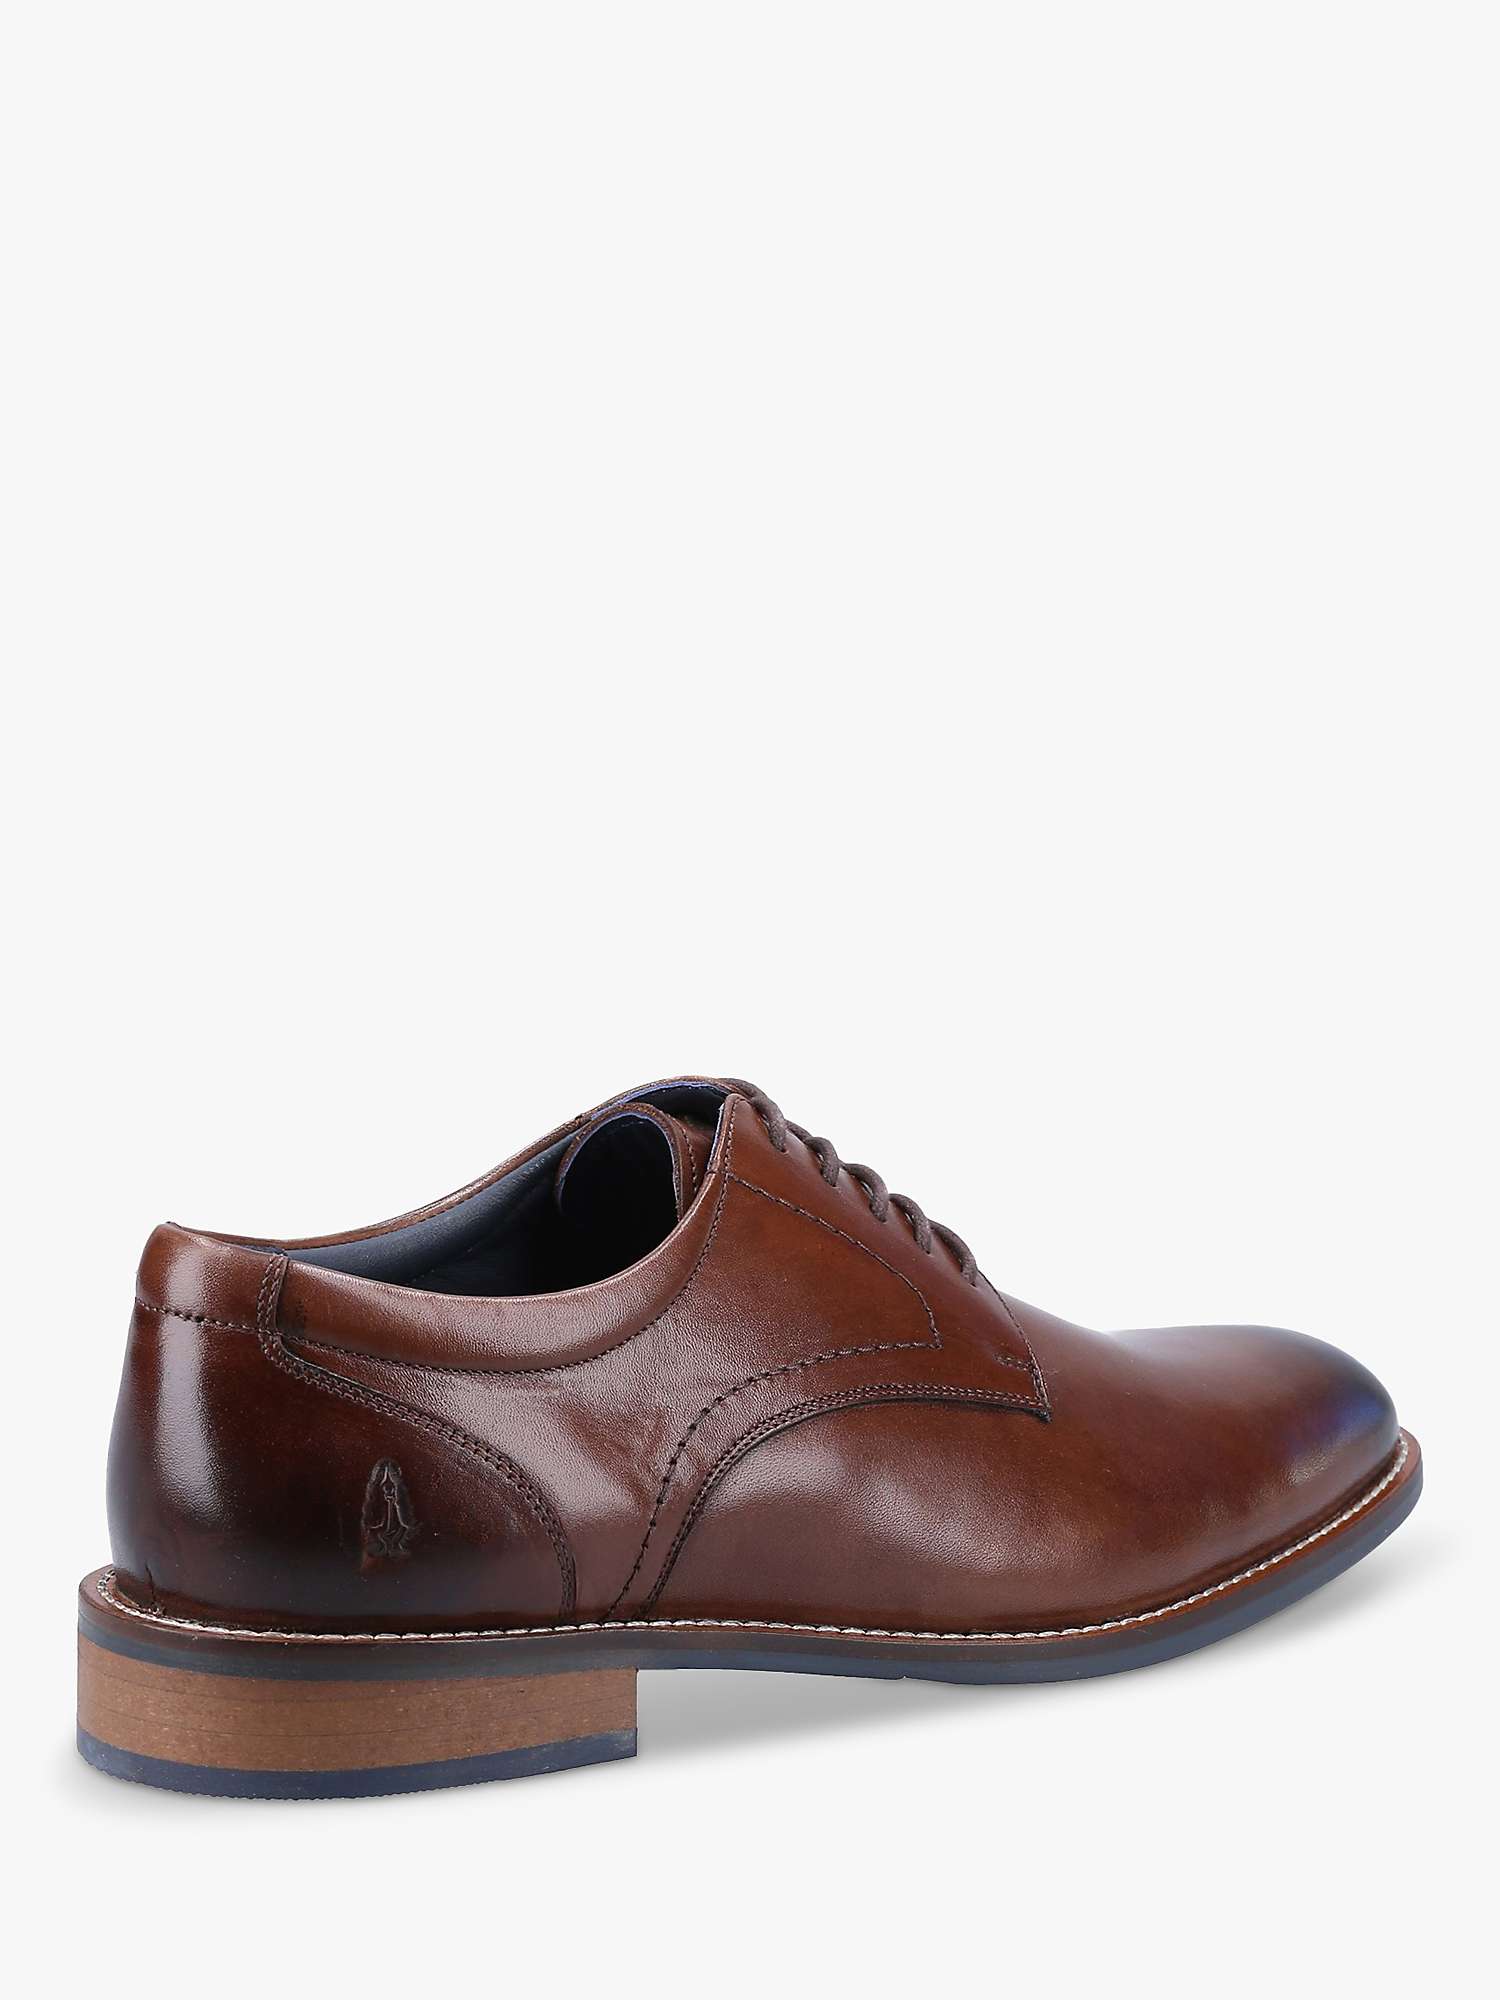 Buy Hush Puppies Damien Leather Derby Shoes Online at johnlewis.com